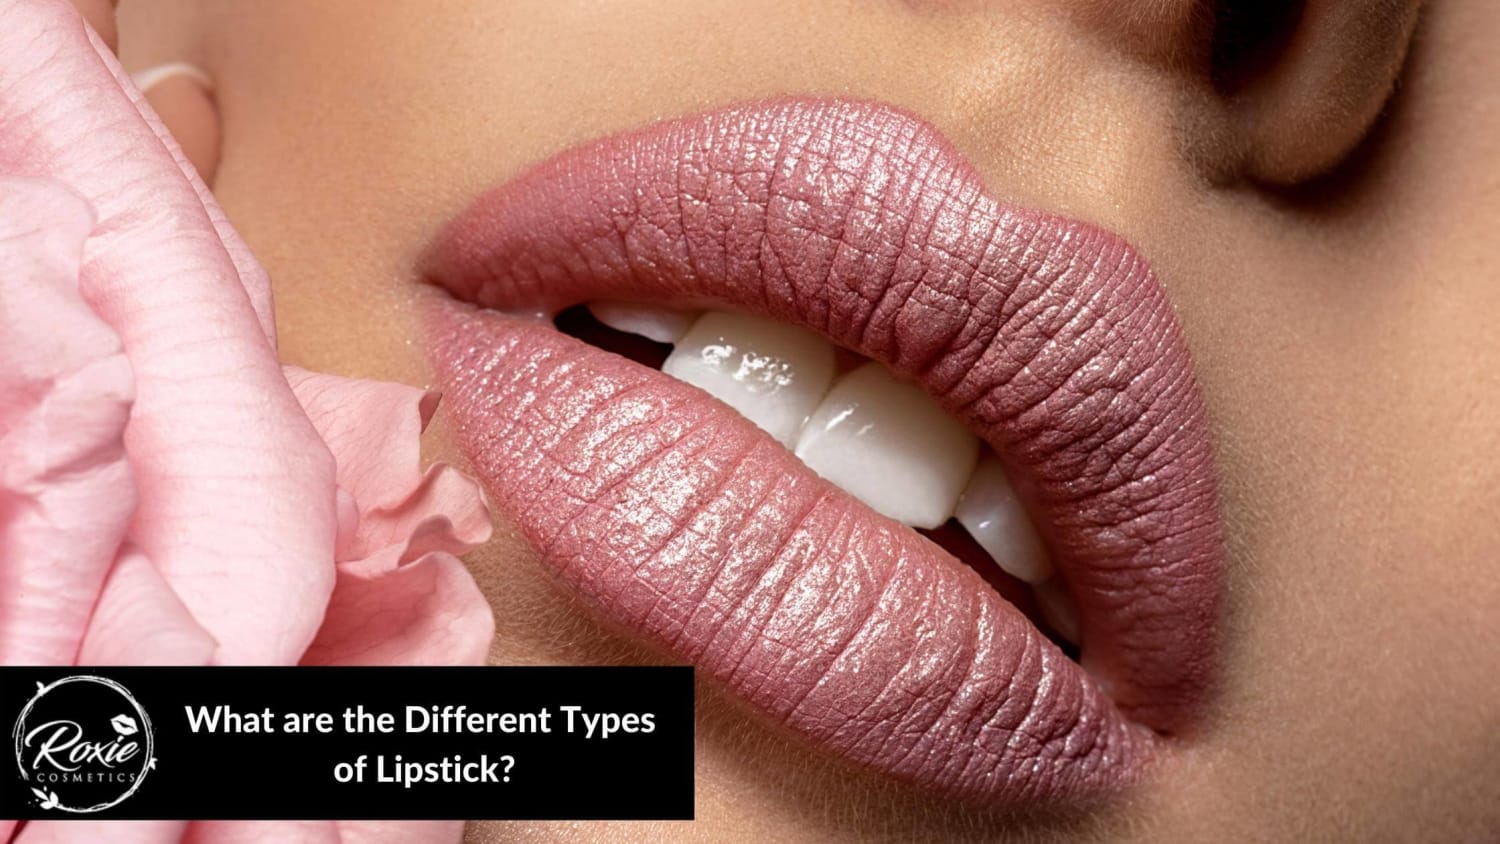 Lip Balm vs. Lip Gloss: What's the Difference?